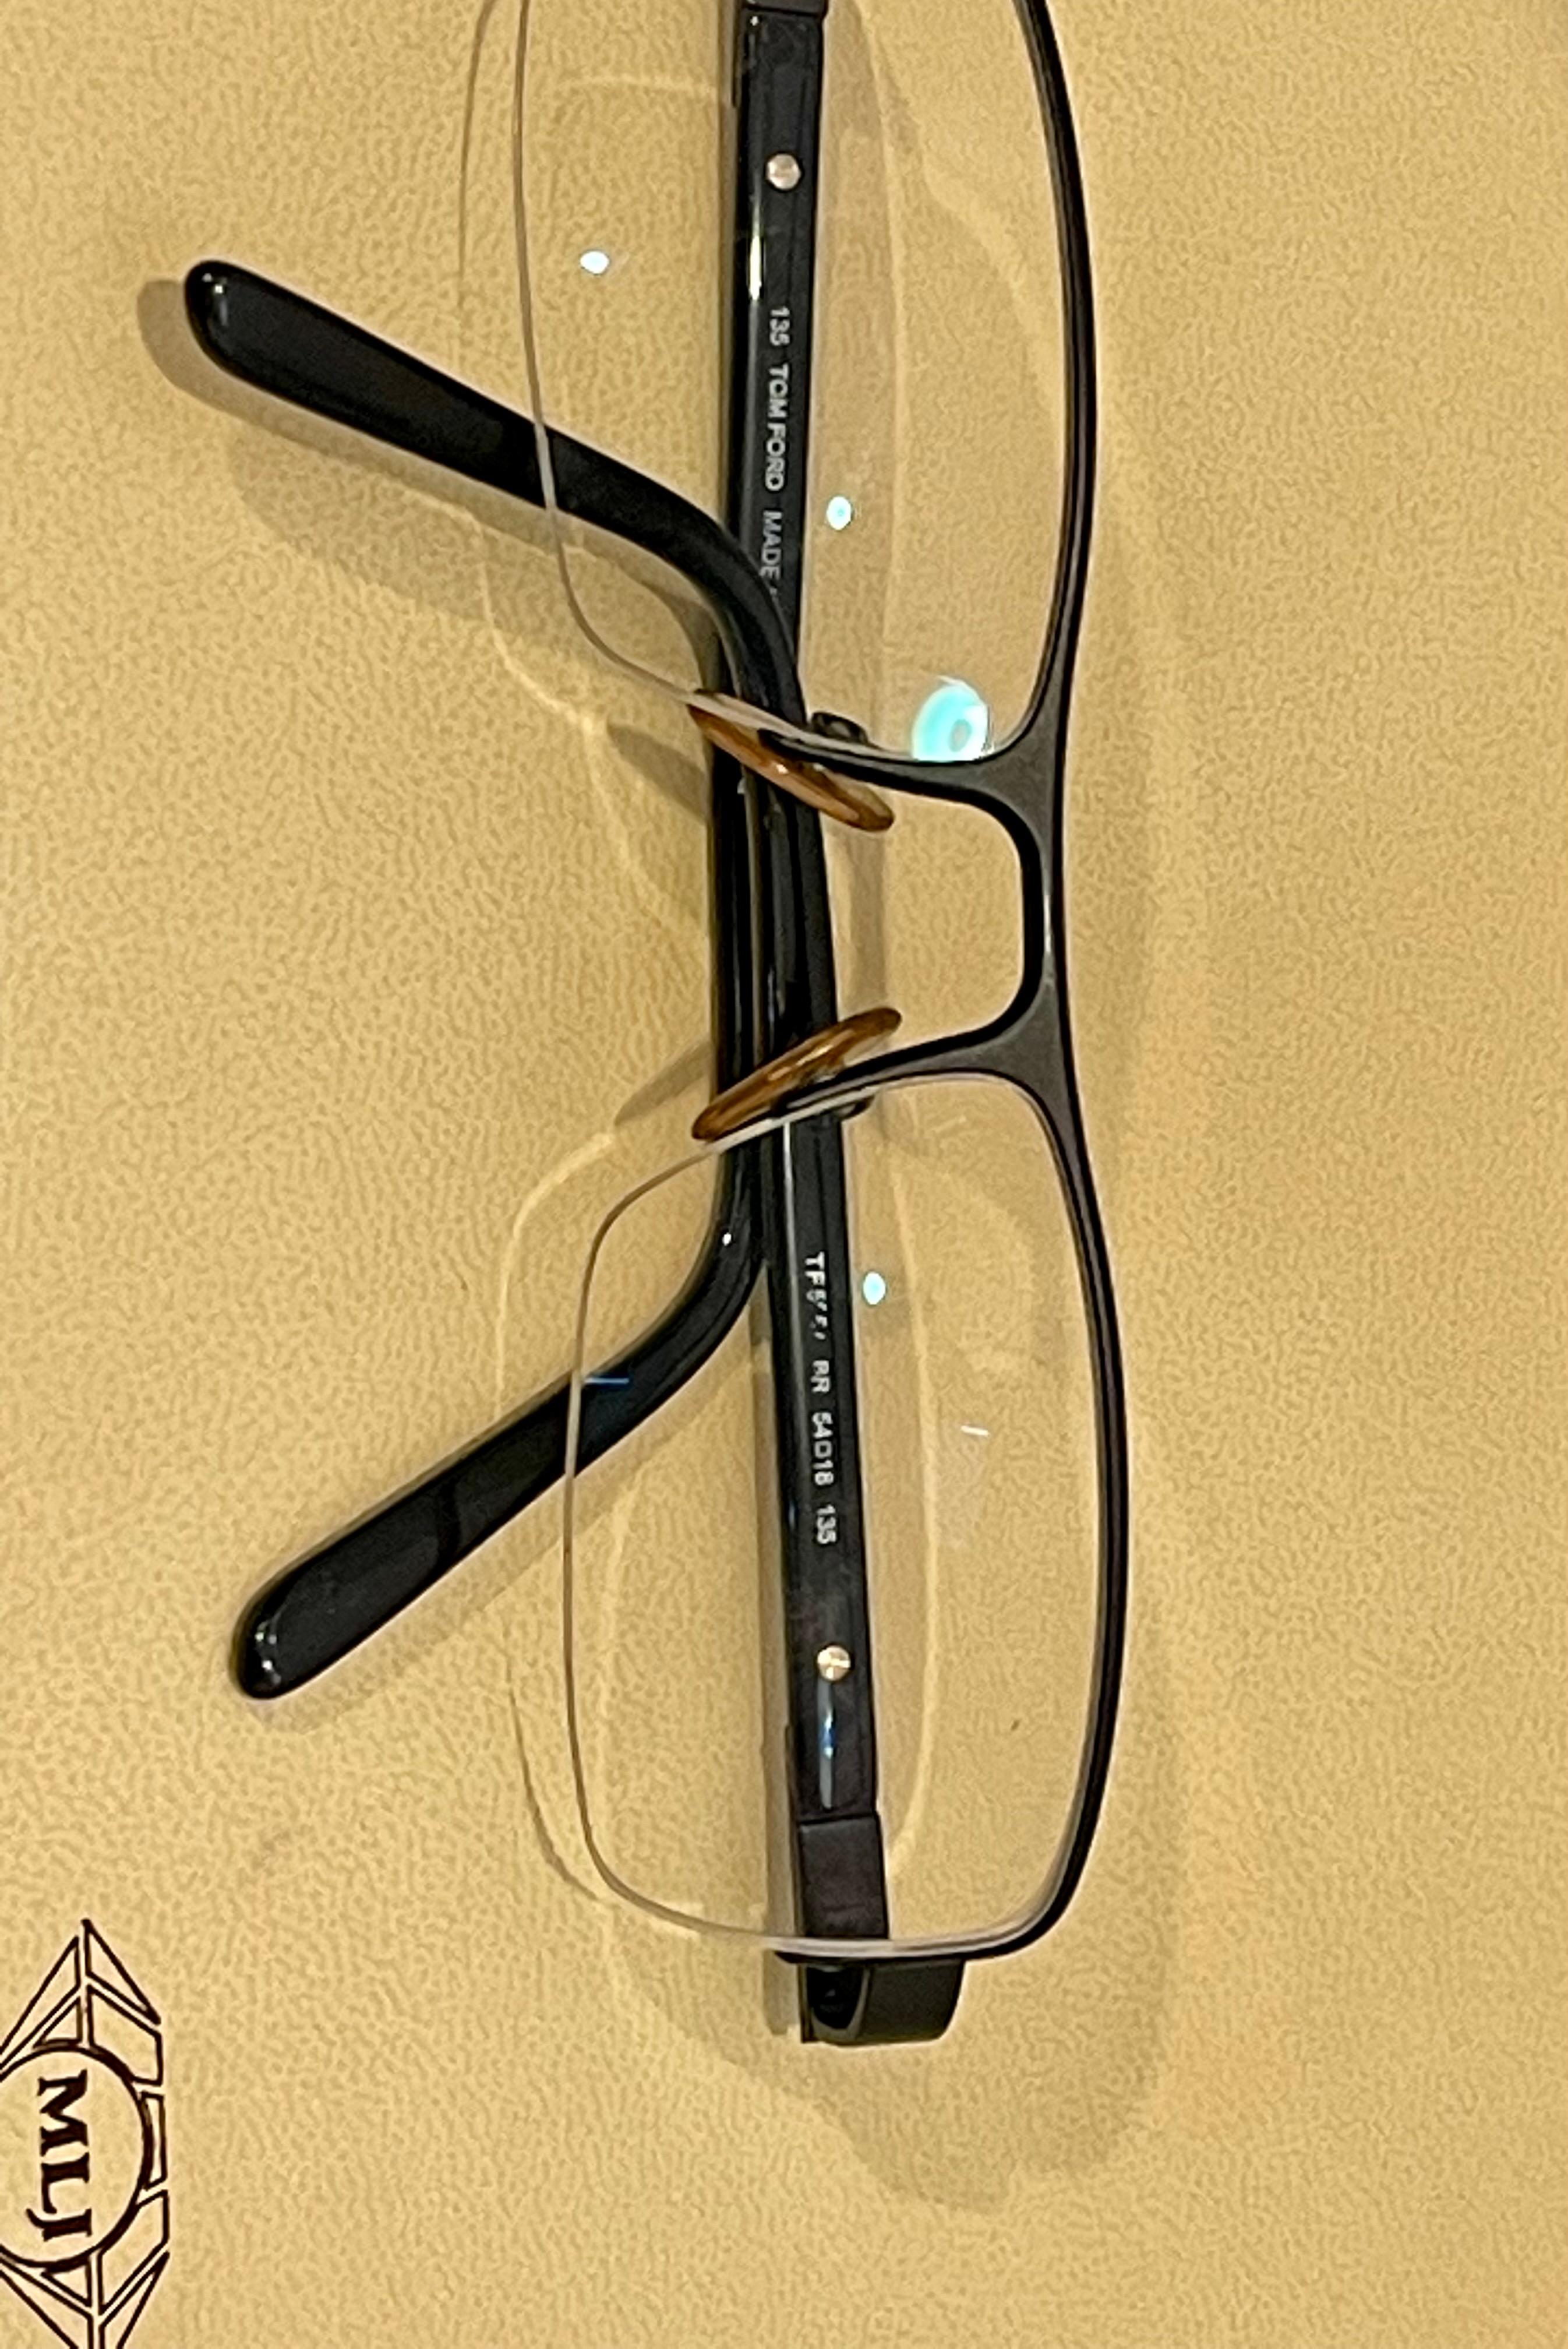 Tom Ford FT 5056 Rectangle Eyeglasses Solstice Sunglasses With Box In Excellent Condition For Sale In New York, NY